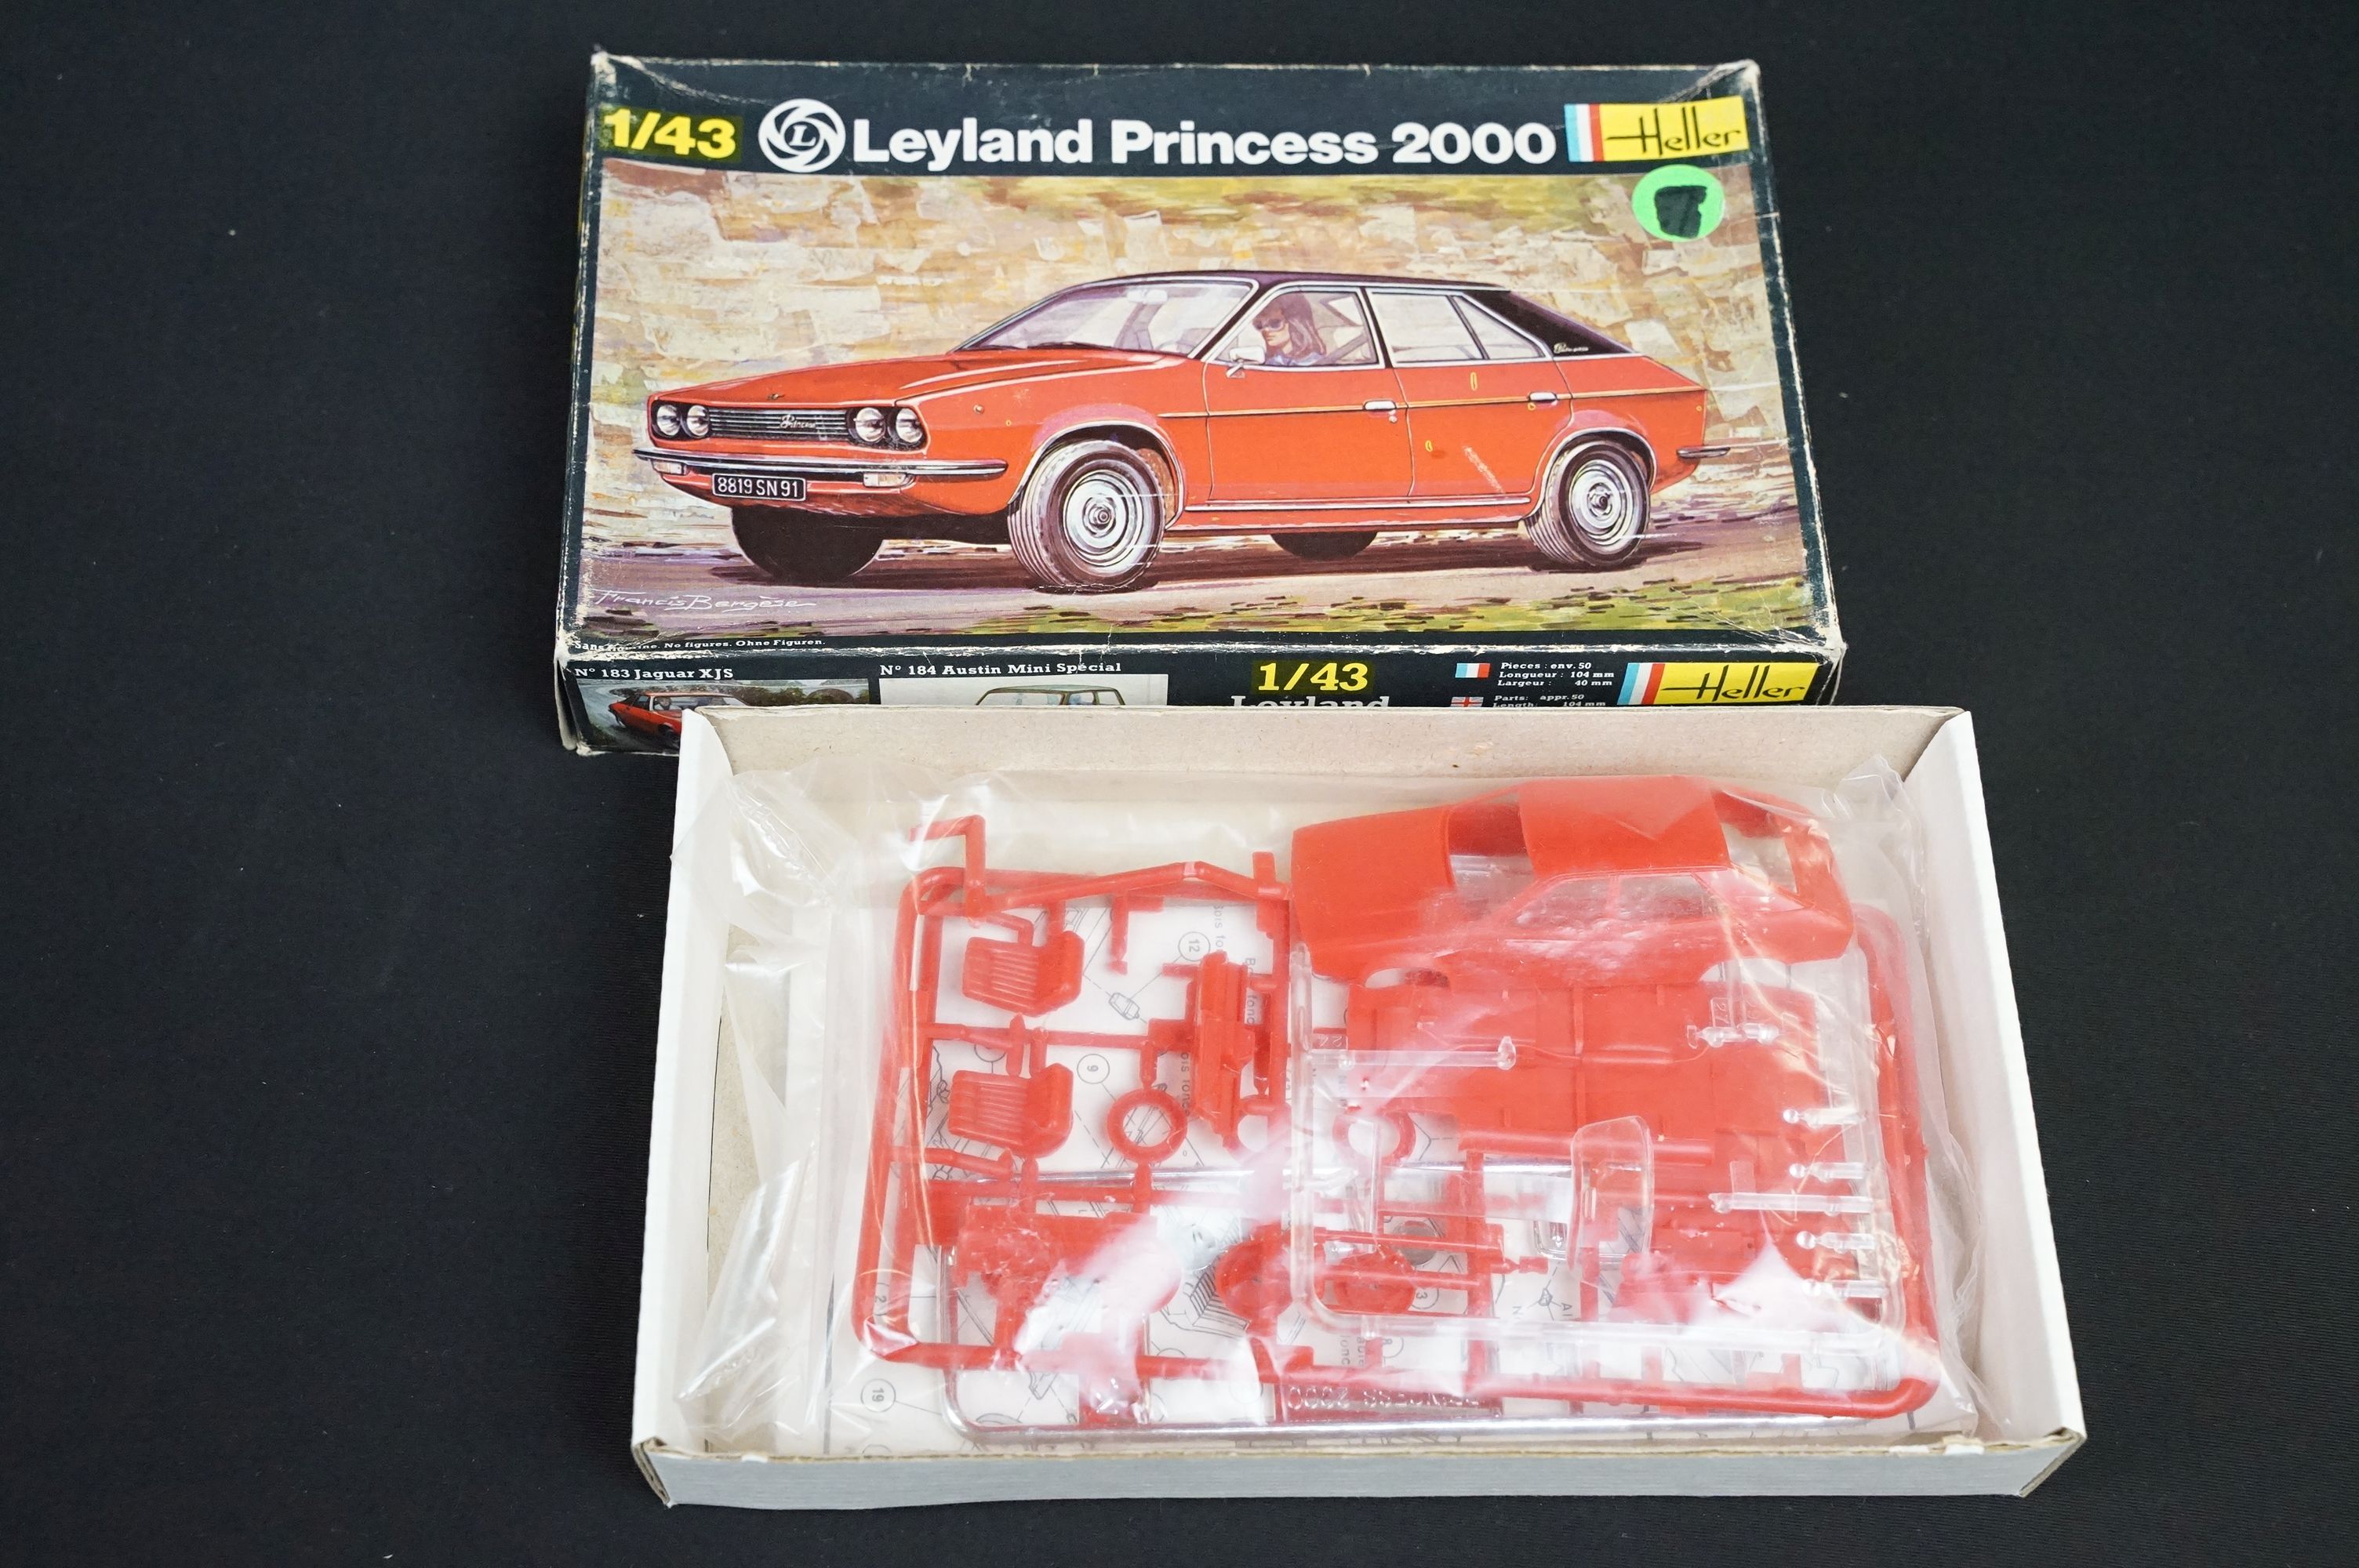 Five boxed Heller 1/43 Leyland Princess 2000 plastic model kits (2 sealed examples) along with 2 x - Image 2 of 5